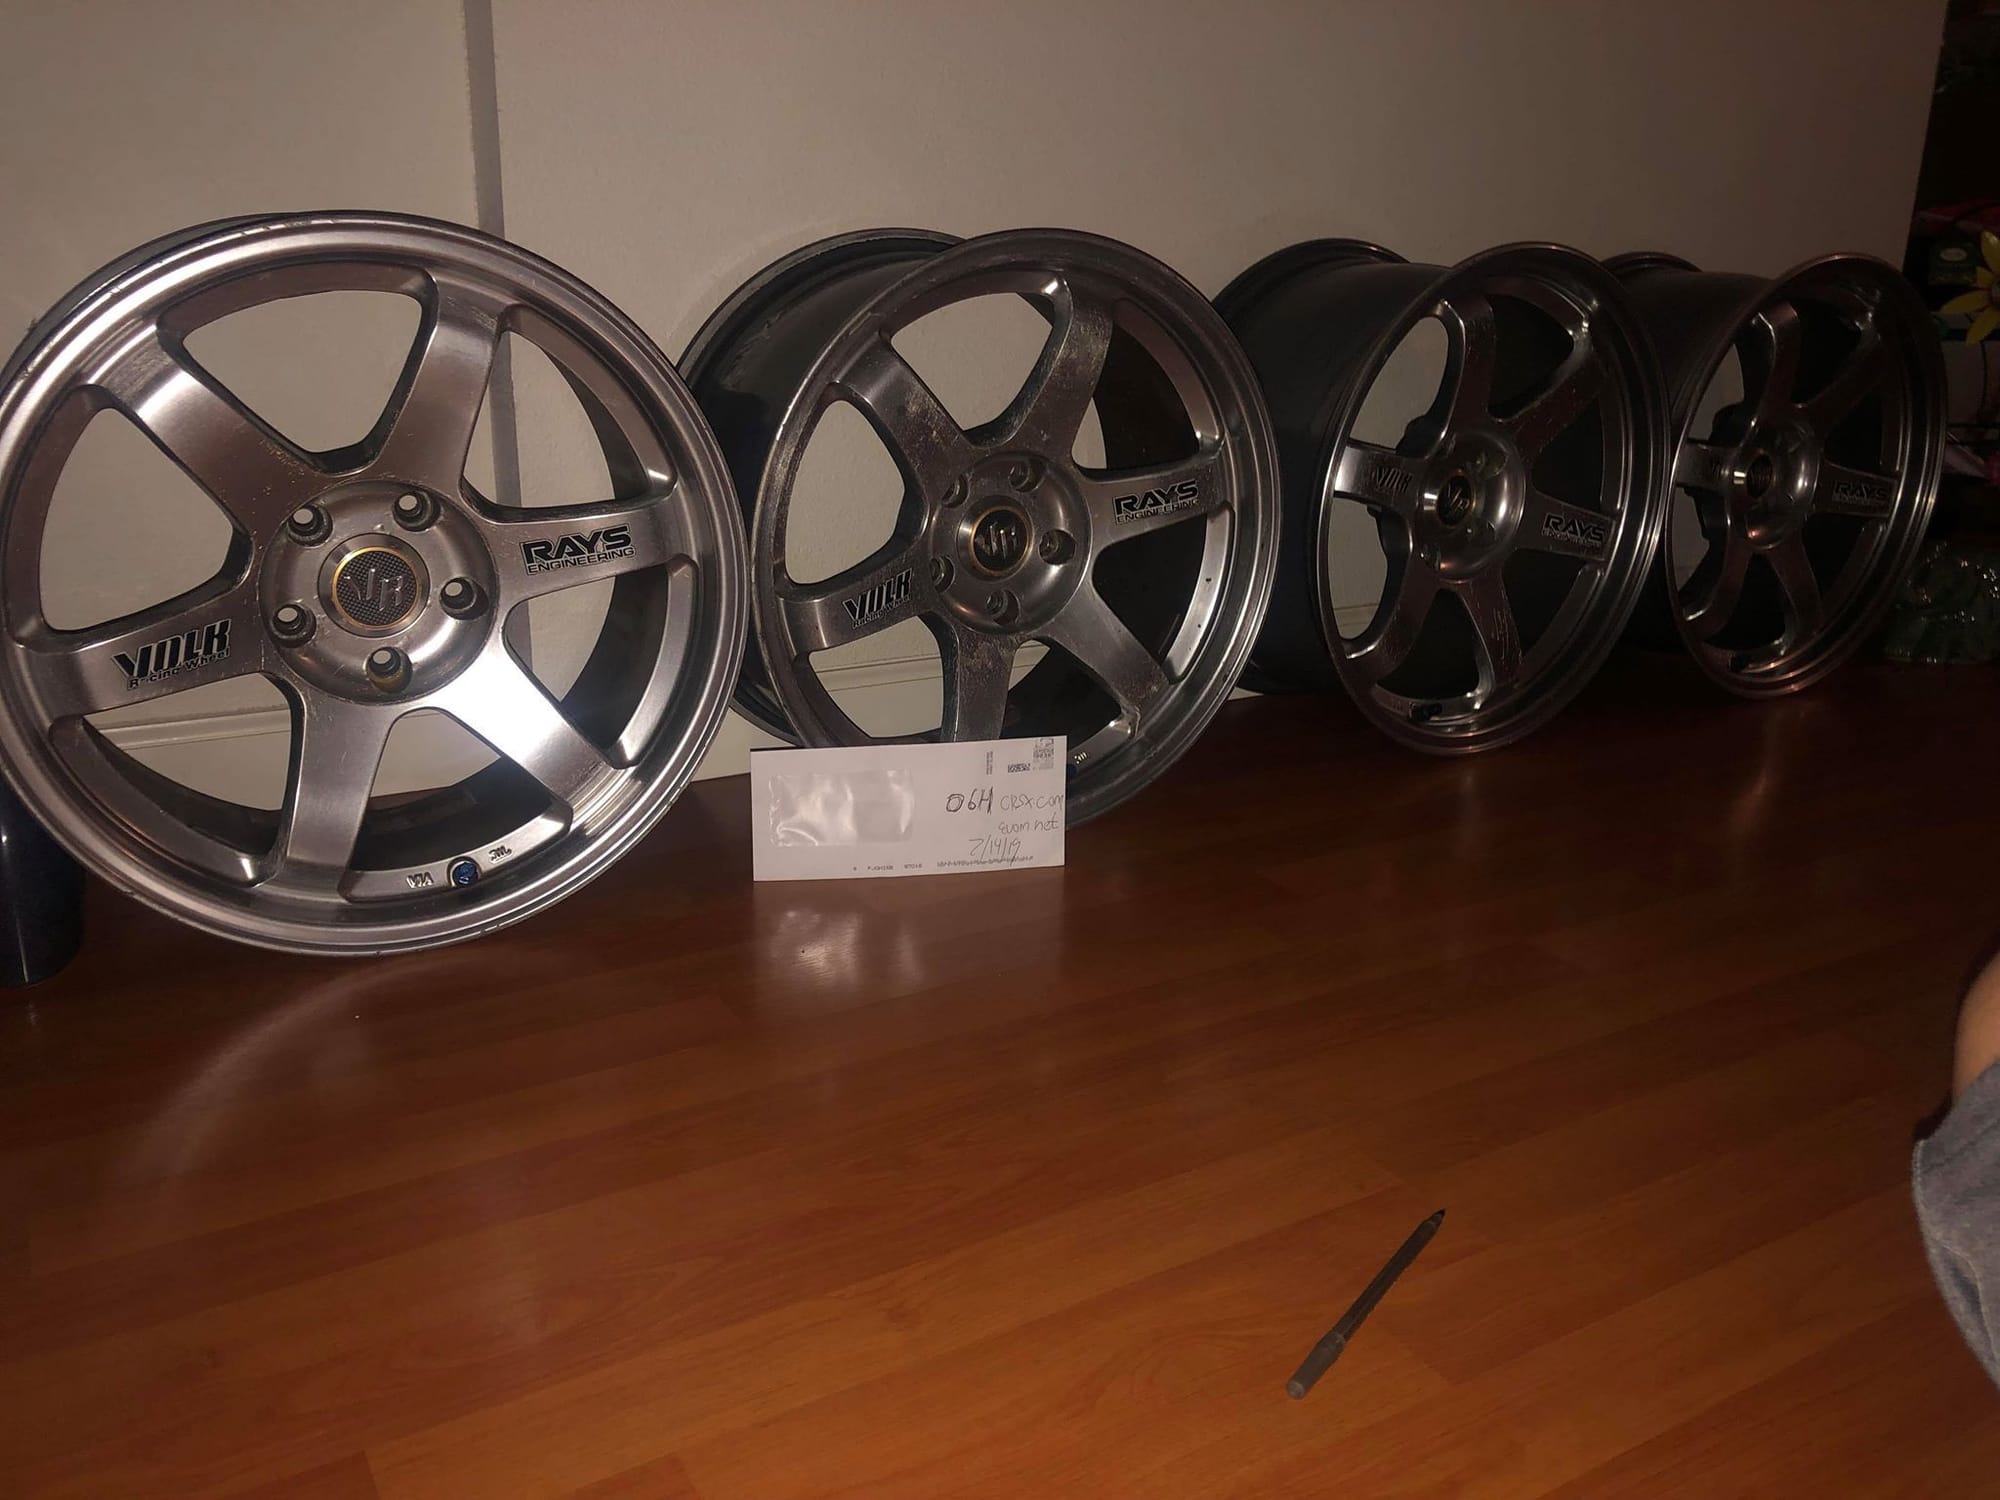 Wheels and Tires/Axles - te37 17x9+22 for sale PDX, OR free shipping - Used - 2002 to 2006 Acura RSX - 2004 to 2008 Acura TSX - 2002 to 2012 Mitsubishi Lancer Evolution - Portland, OR 97236, United States